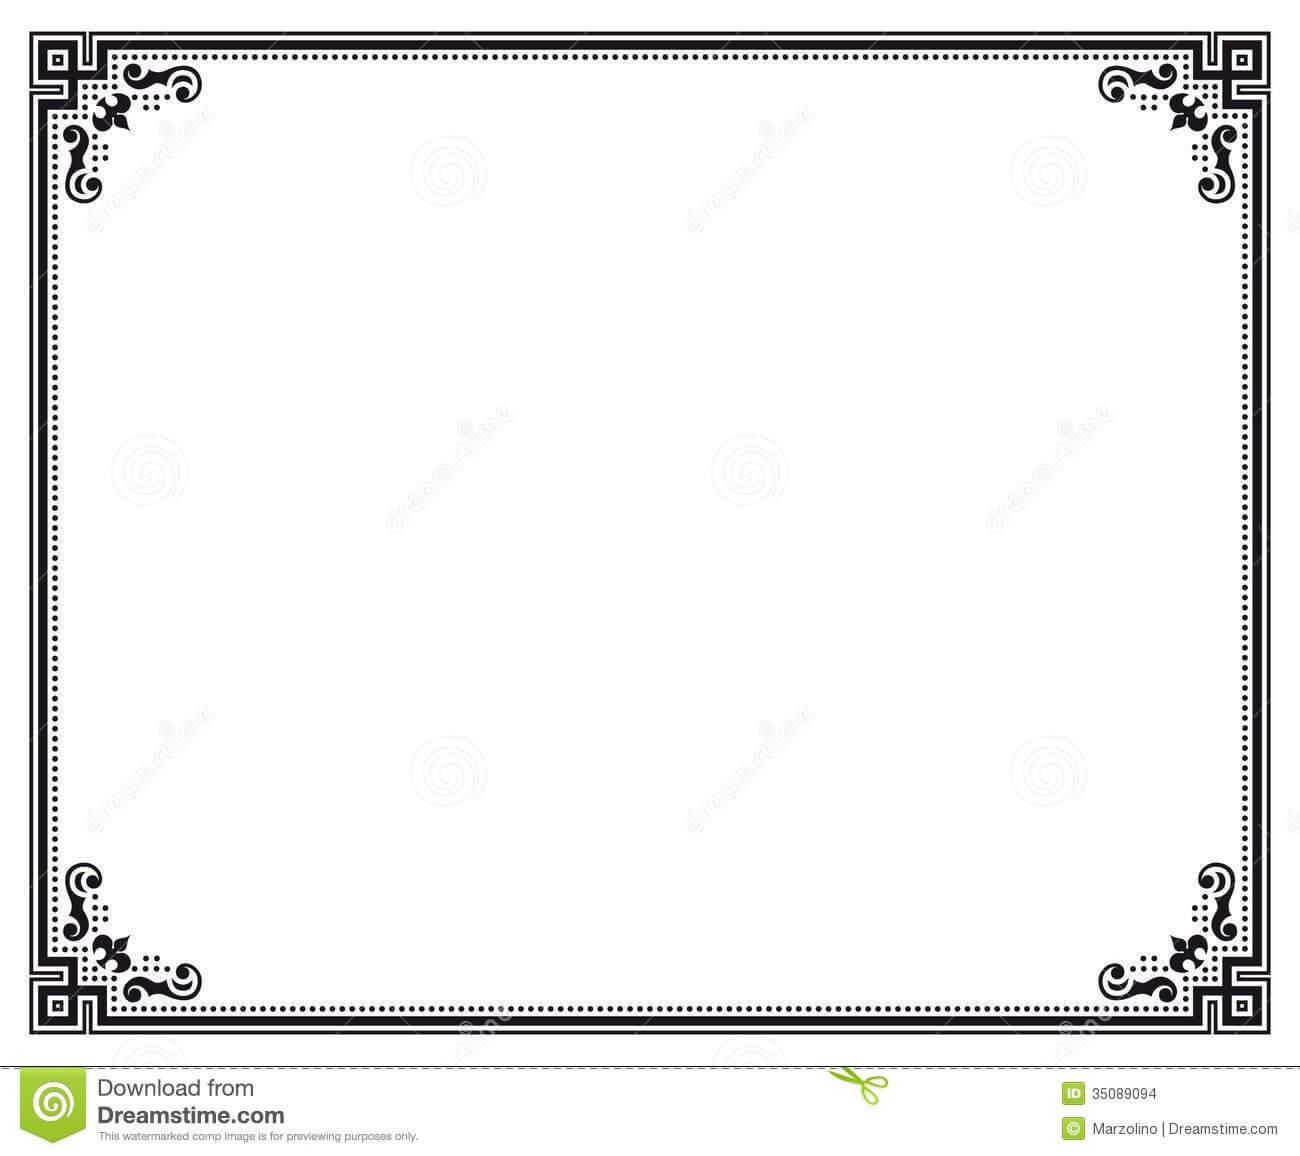 Certificate Border Vector Free Download At Getdrawings Within Certificate Border Design Templates